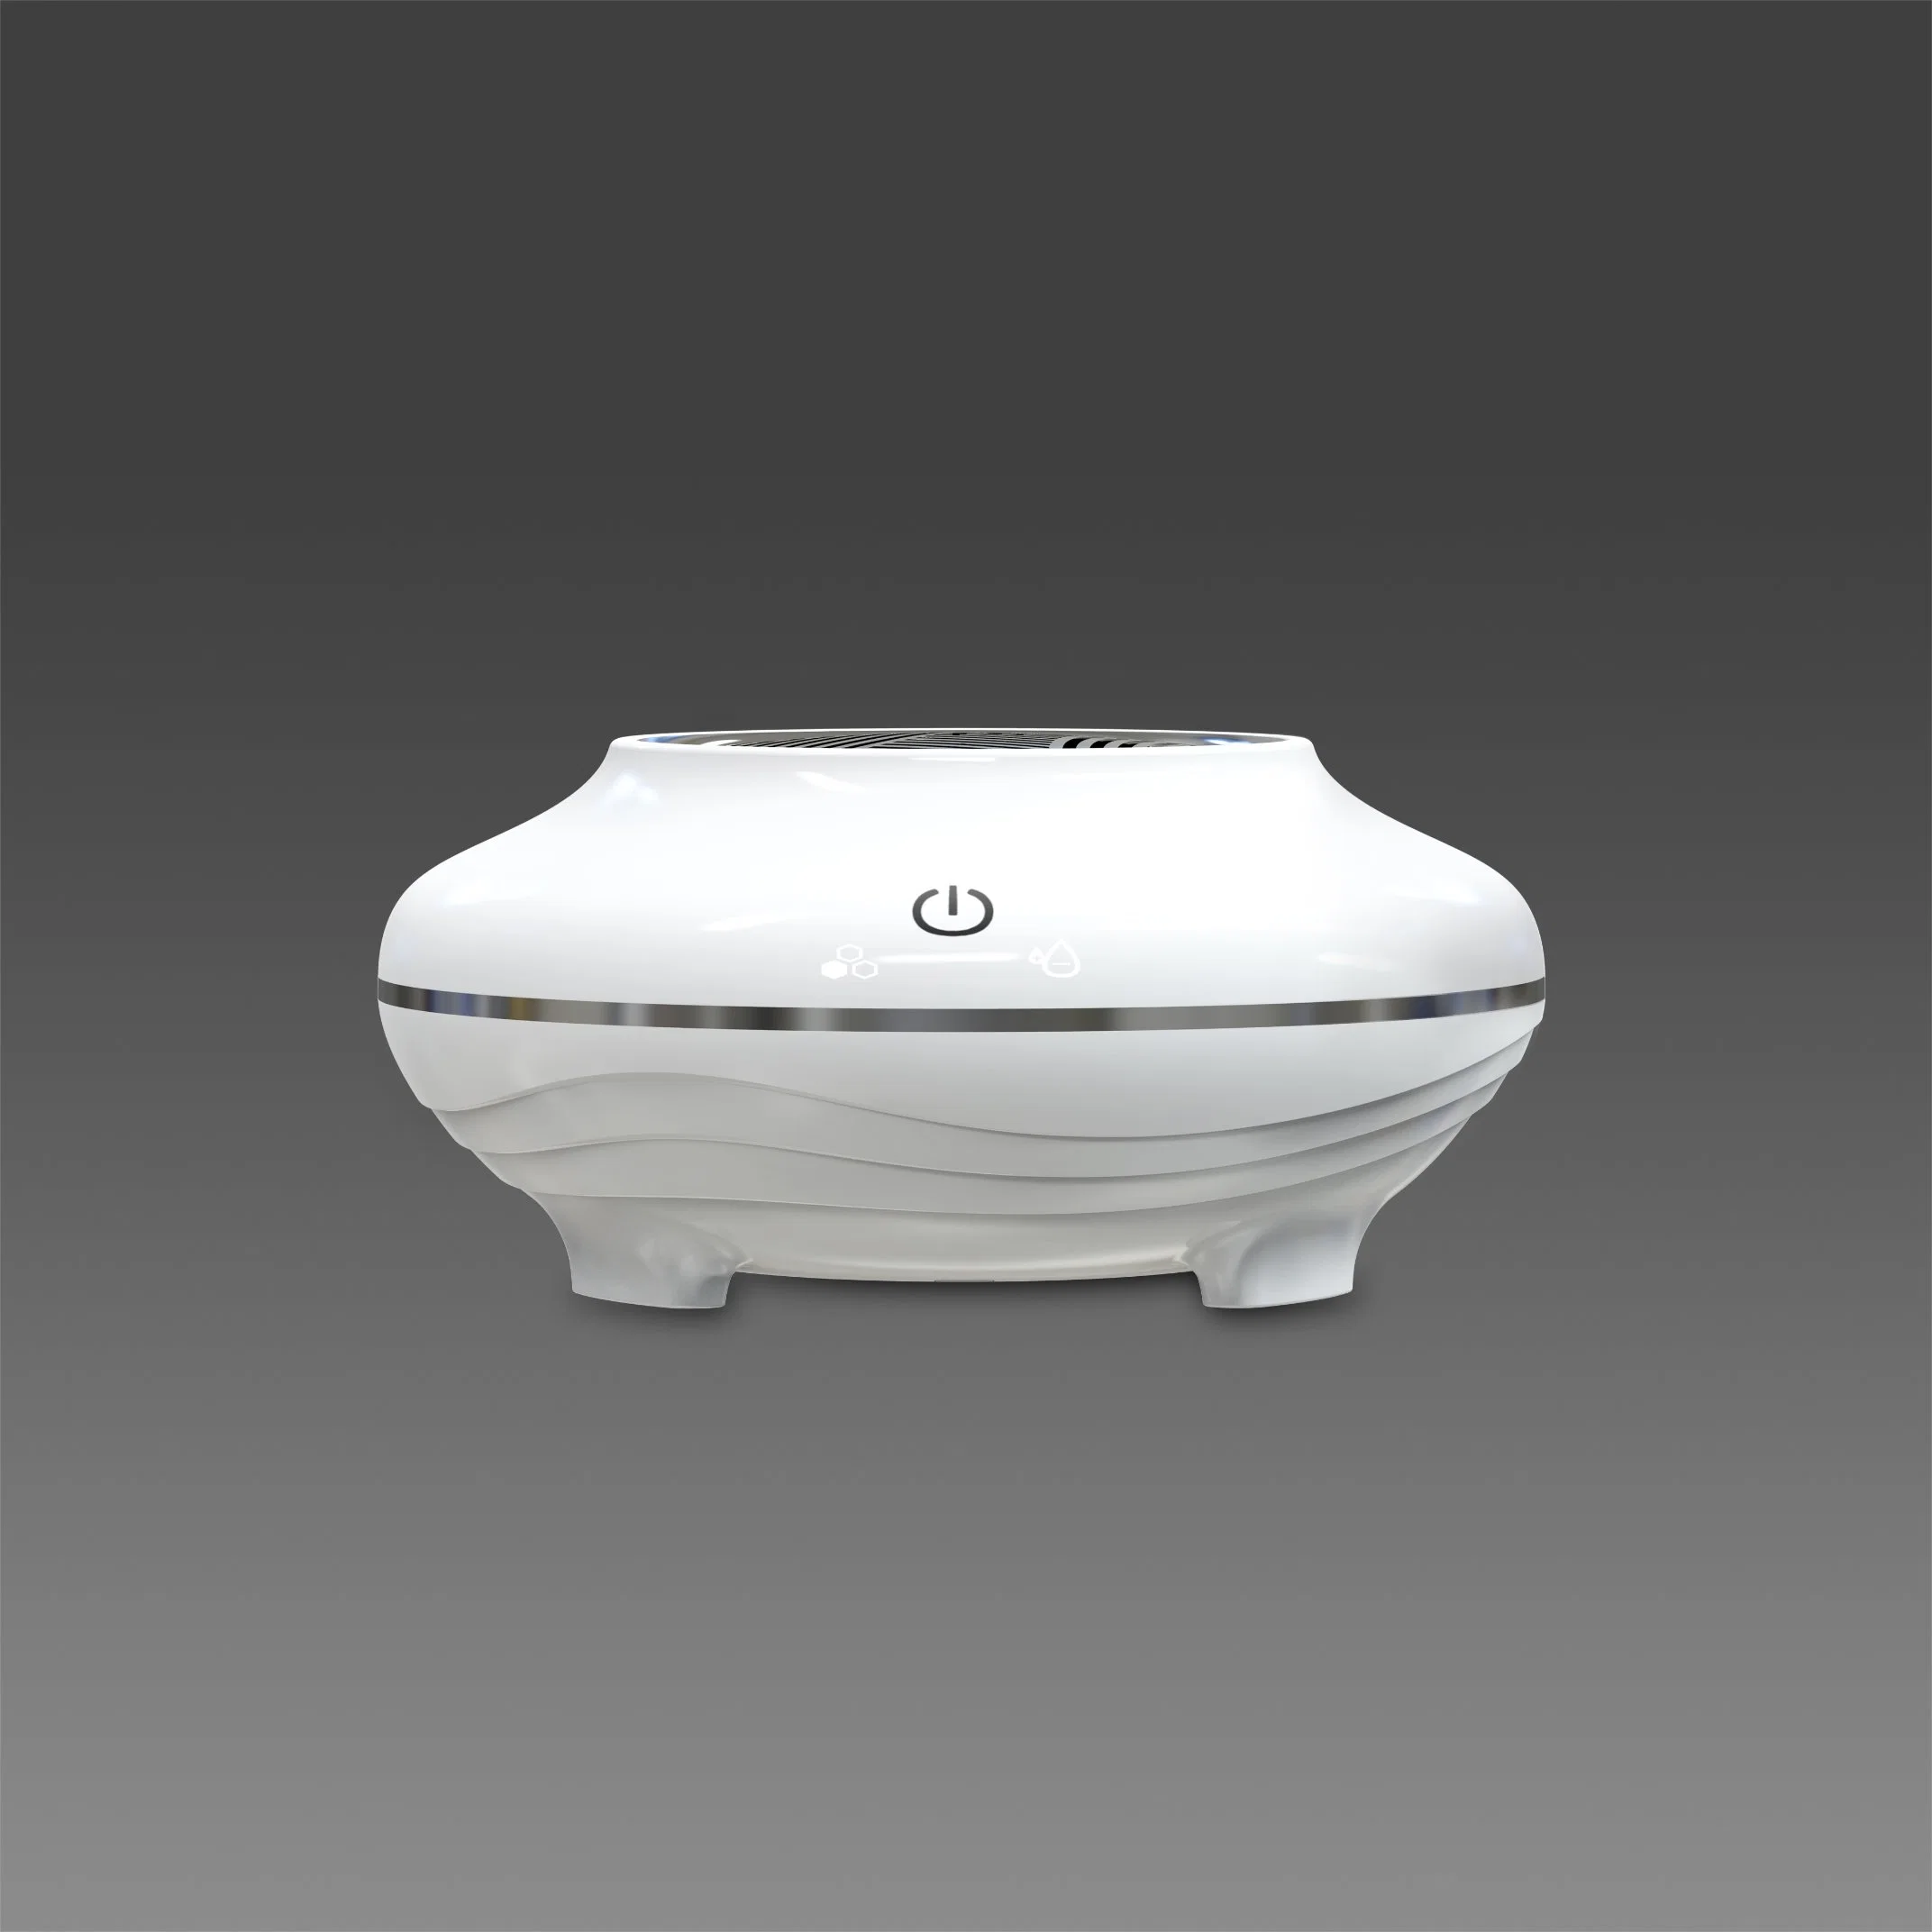 HEPA H13 Home Appliance Portable Purification System Conditioner Humidifier Air Purifier OEM